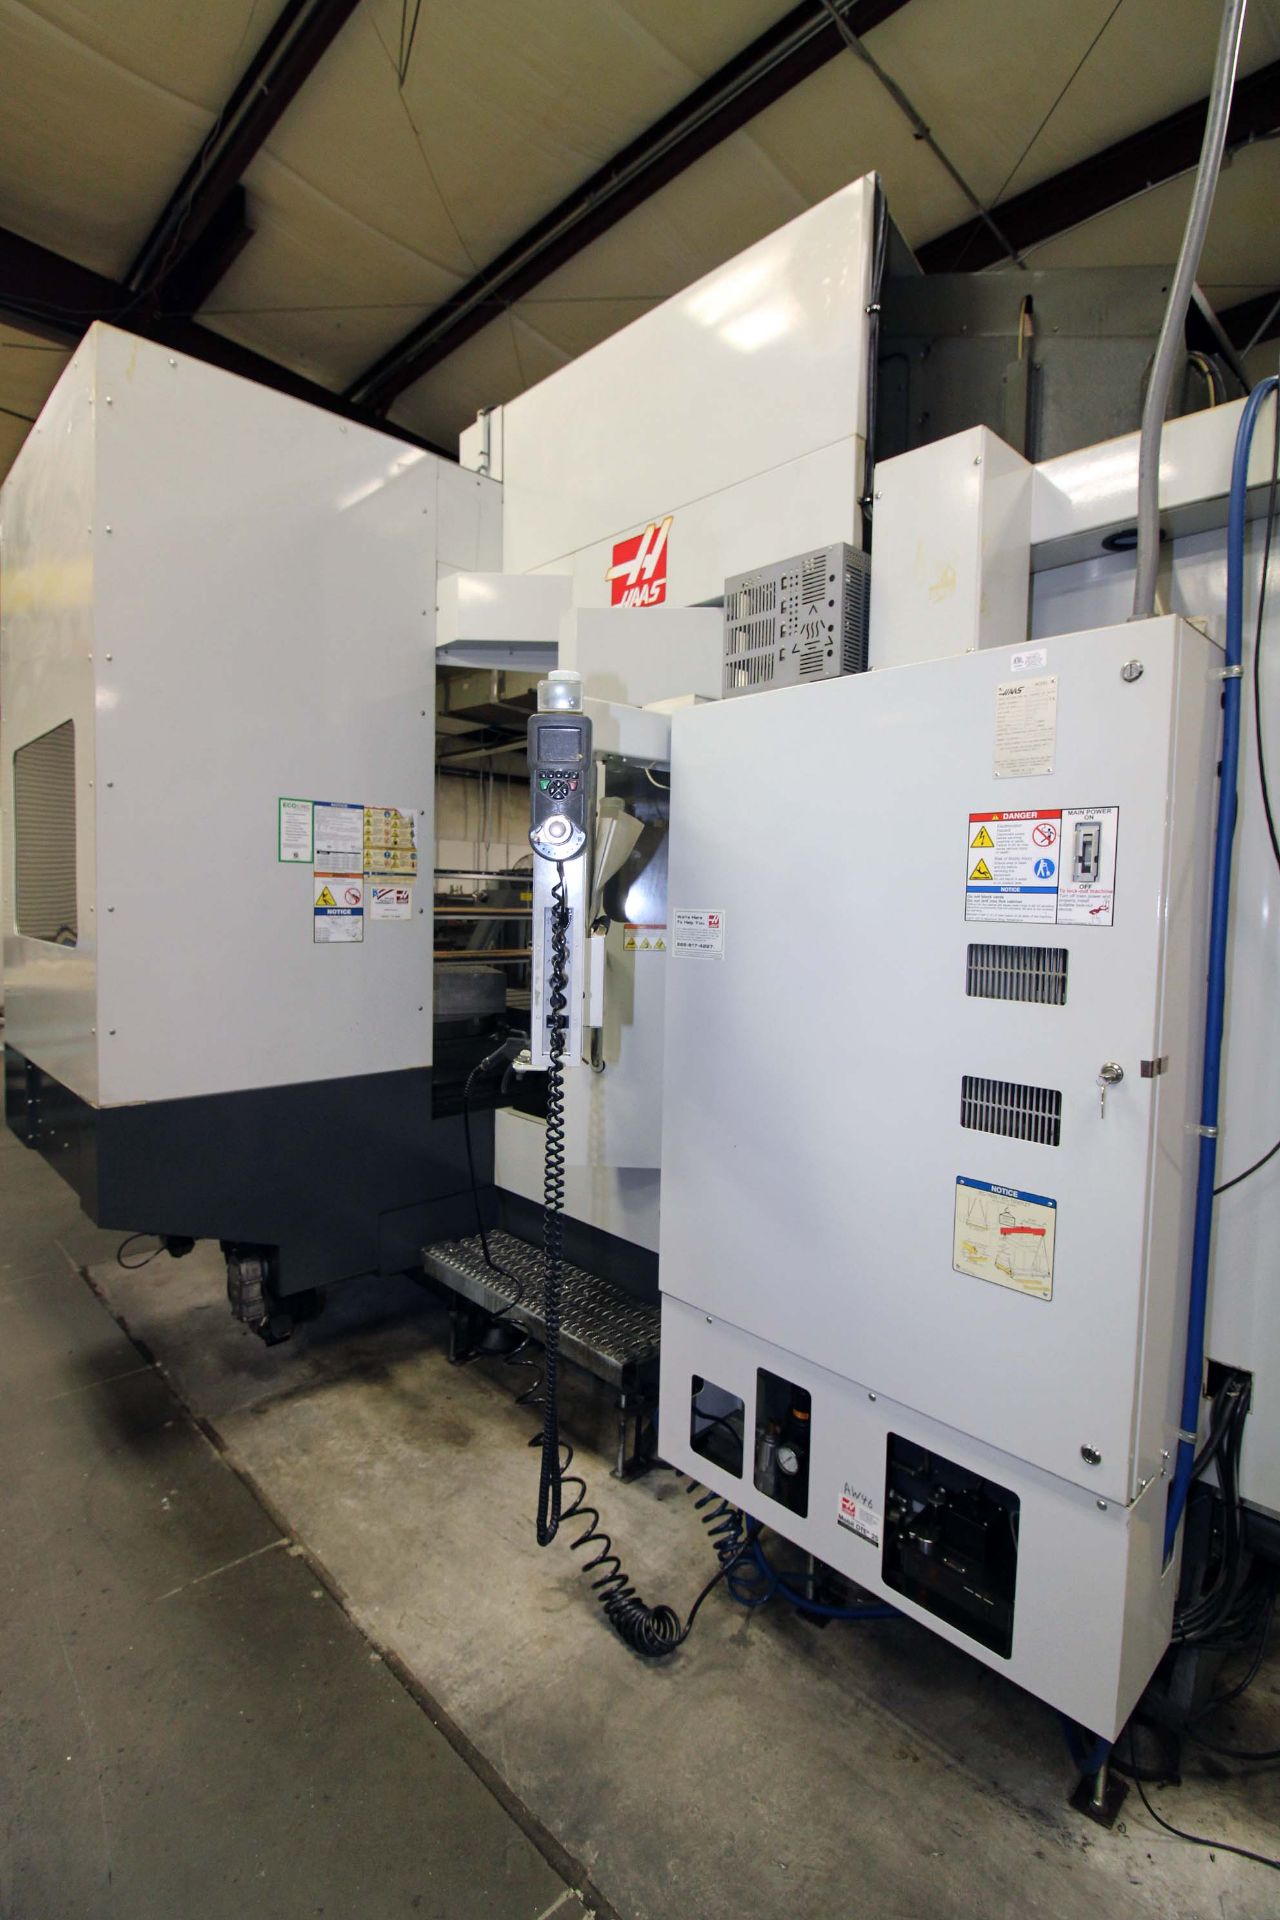 4-AXIS HORIZONTAL MACHINING CENTER, HAAS MDL. EC1600, new 6/2012, 64” x 36” table, 30” built-in - Image 9 of 15